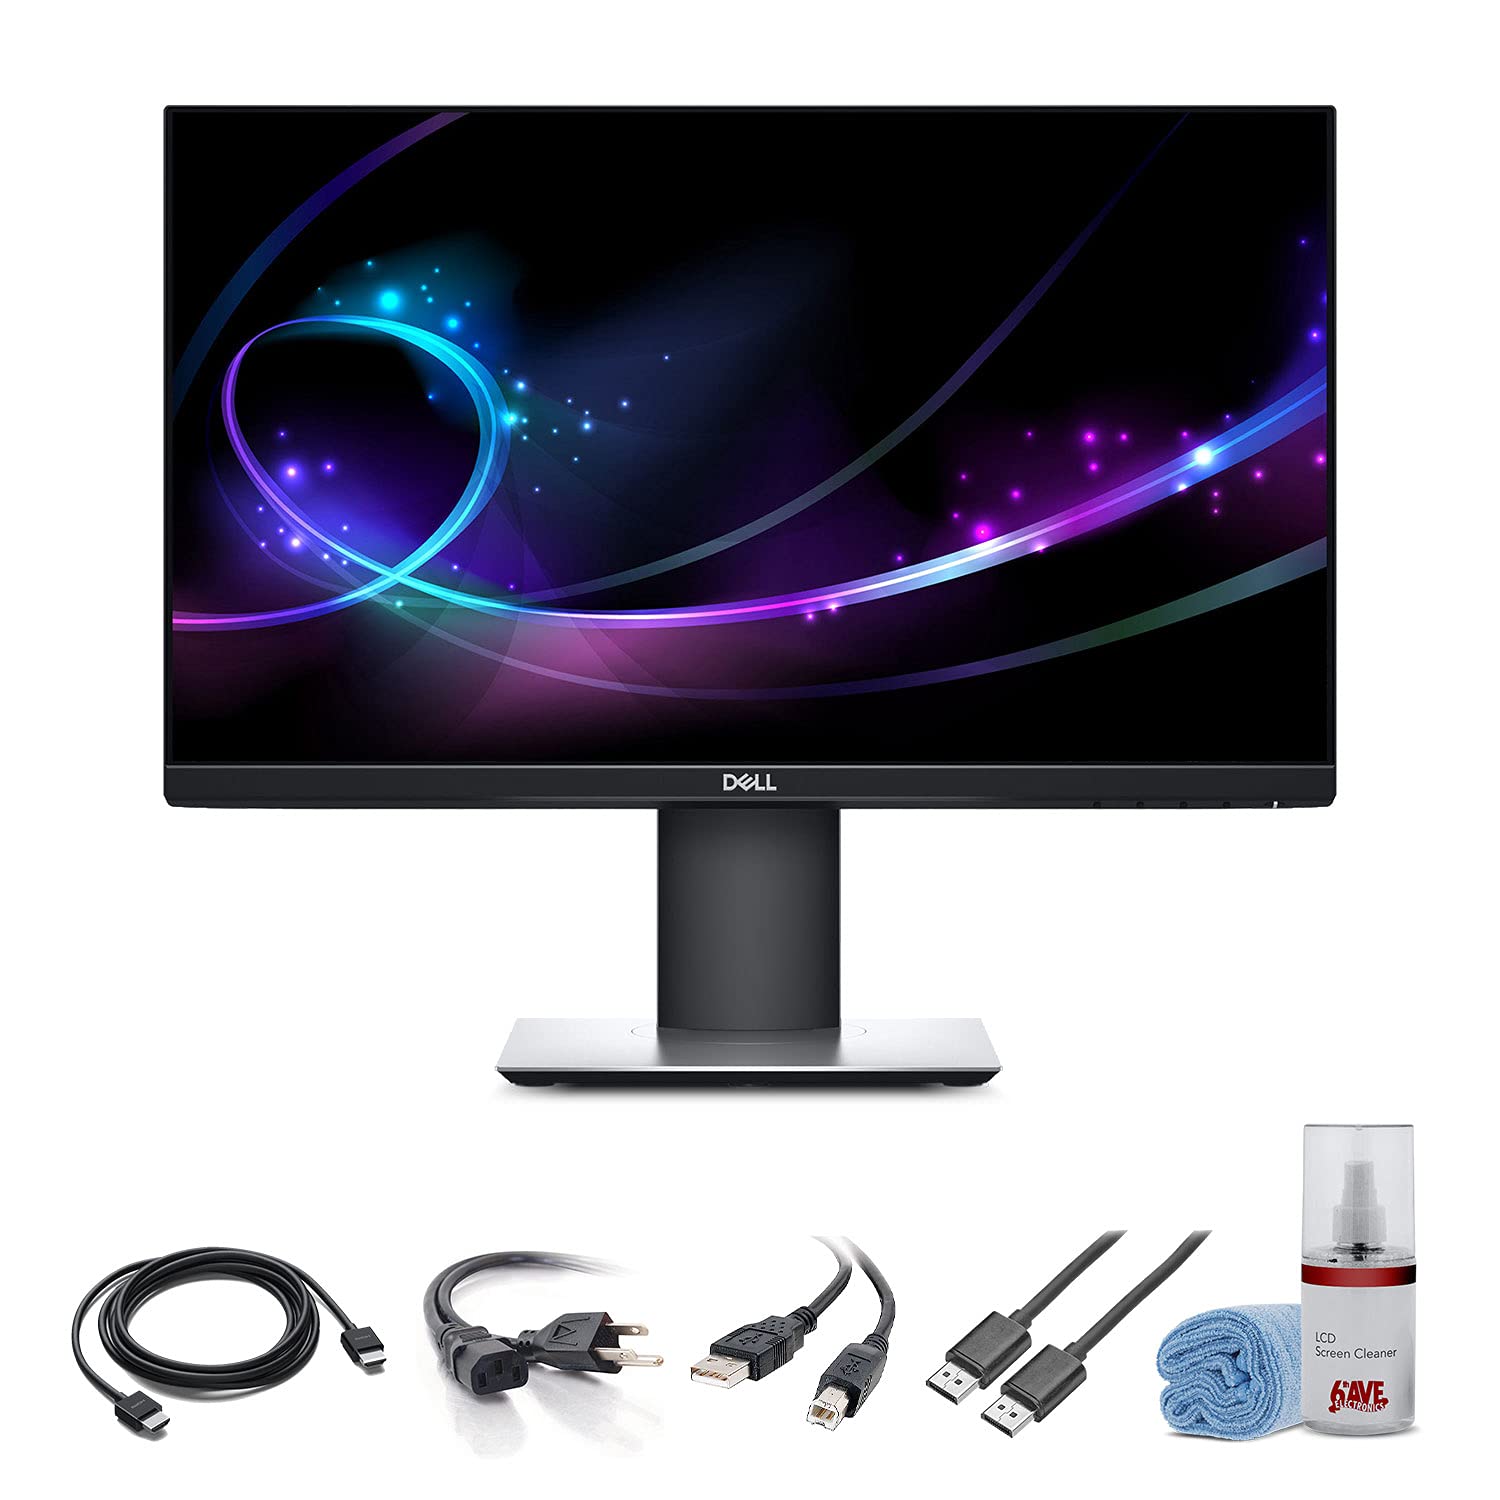 How To Clean A Dell Monitor Screen